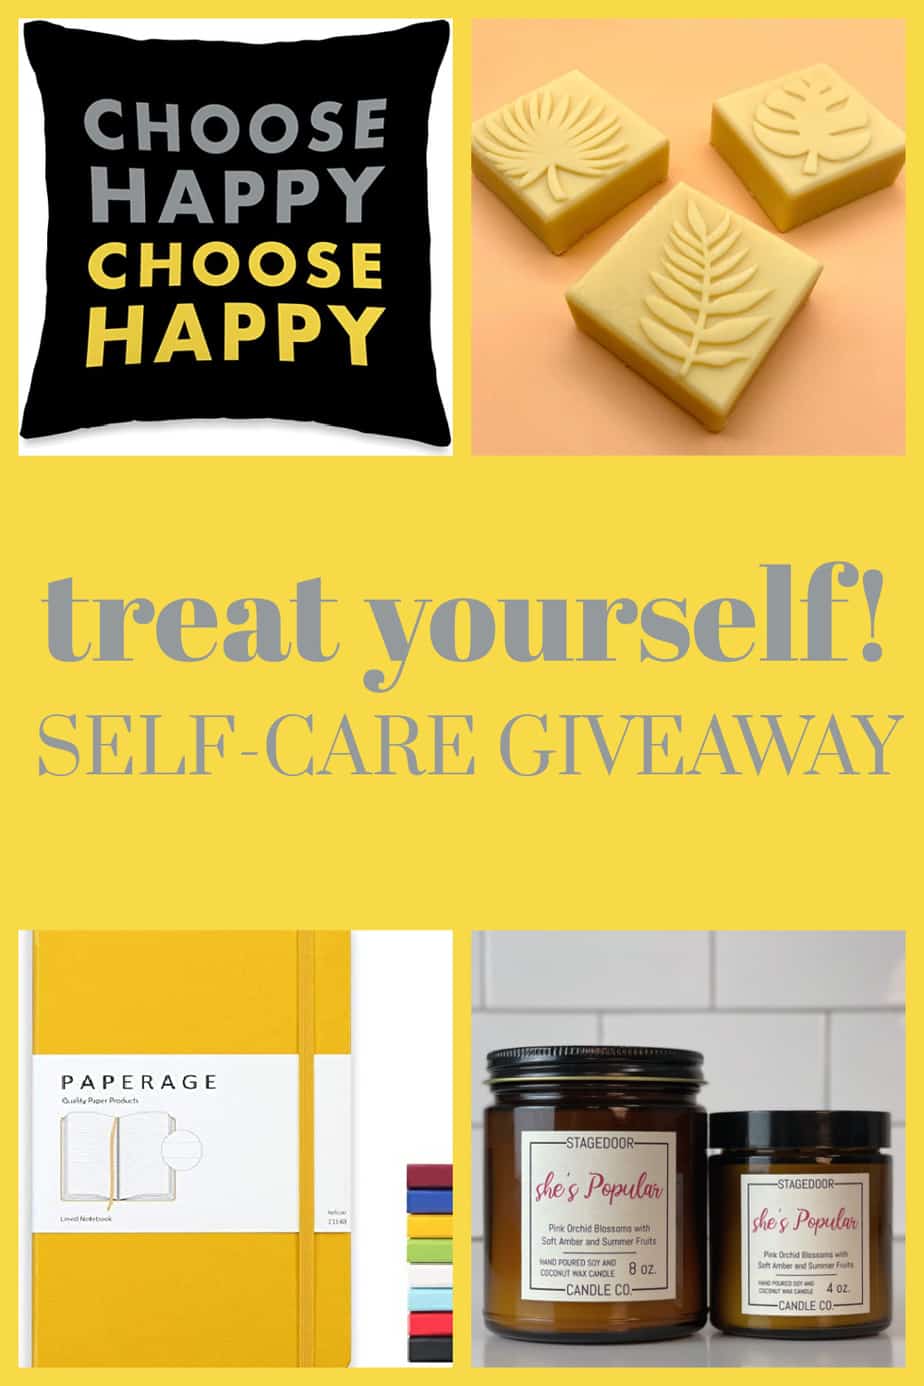 self care ideas : giveaway including self care journal and self care products that smell good!